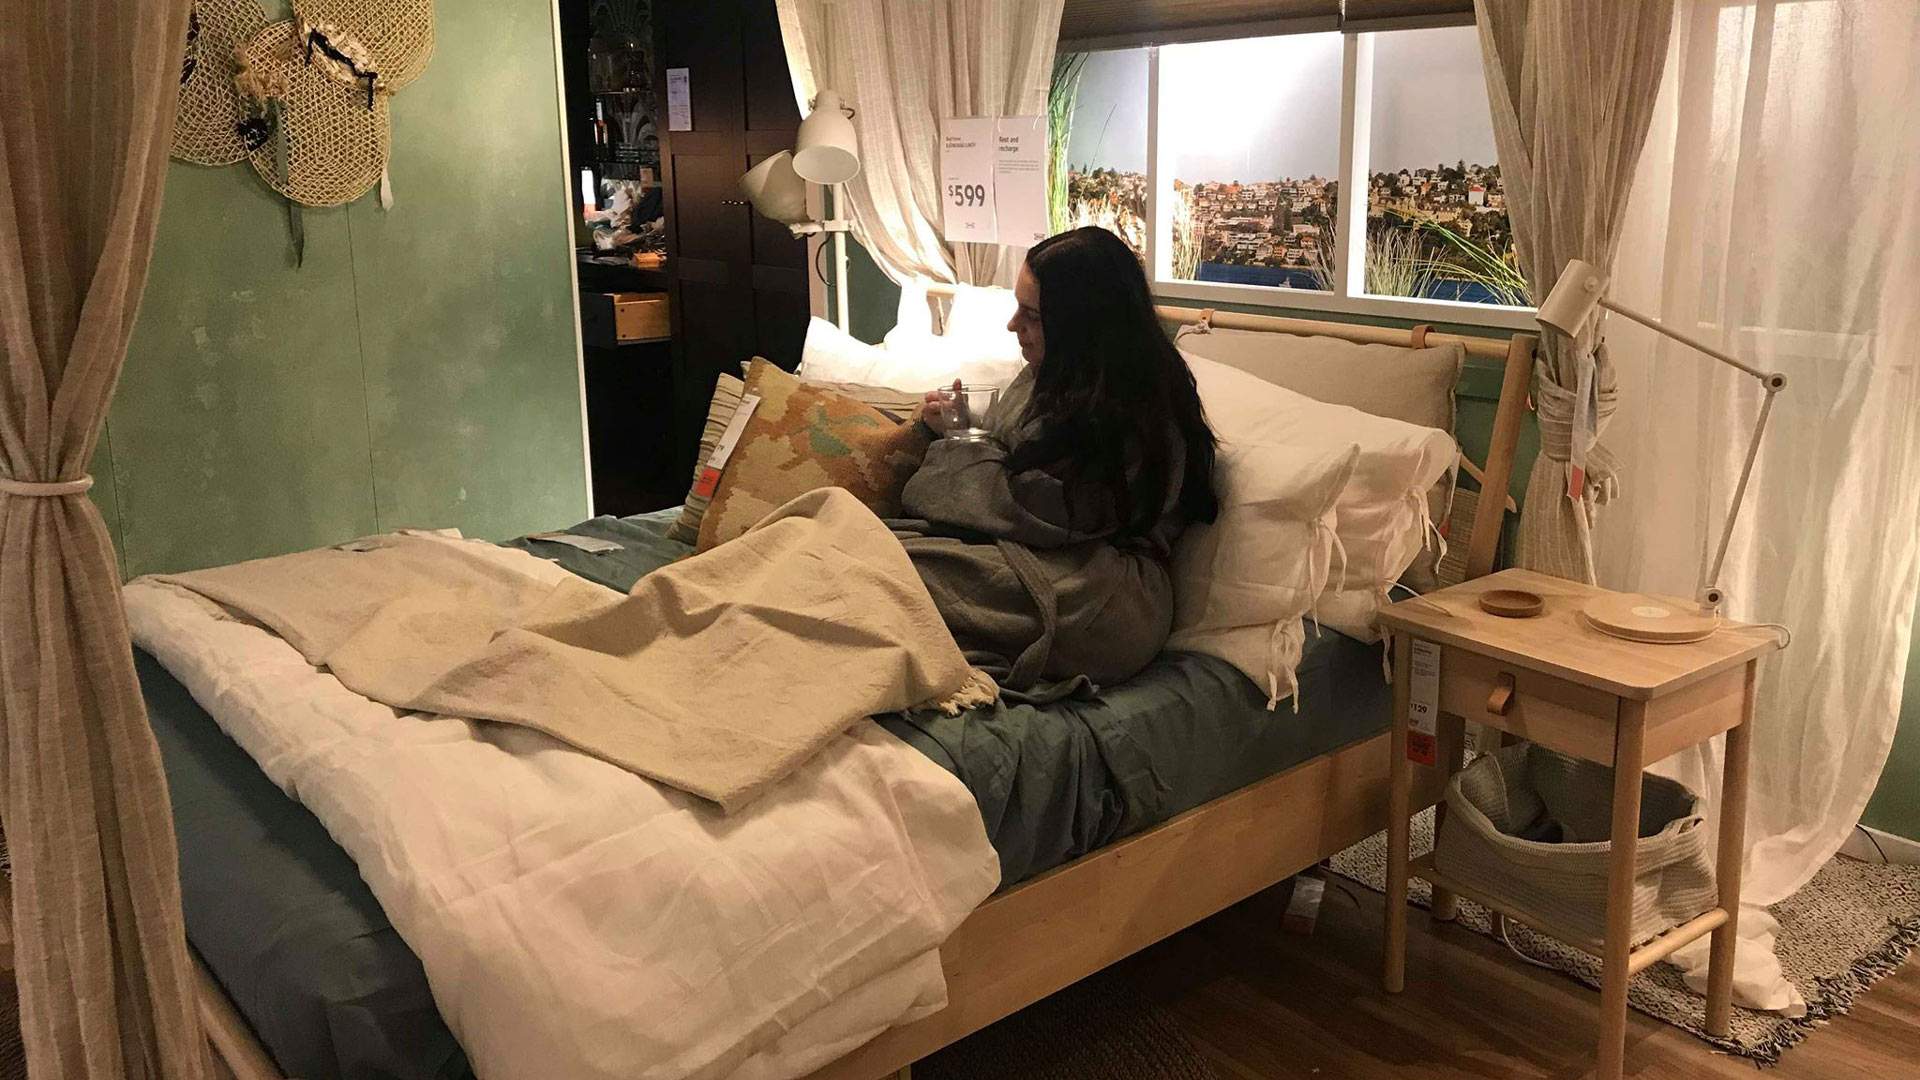 You Could Finally Spend the Night (Legally) at Your Local IKEA Store